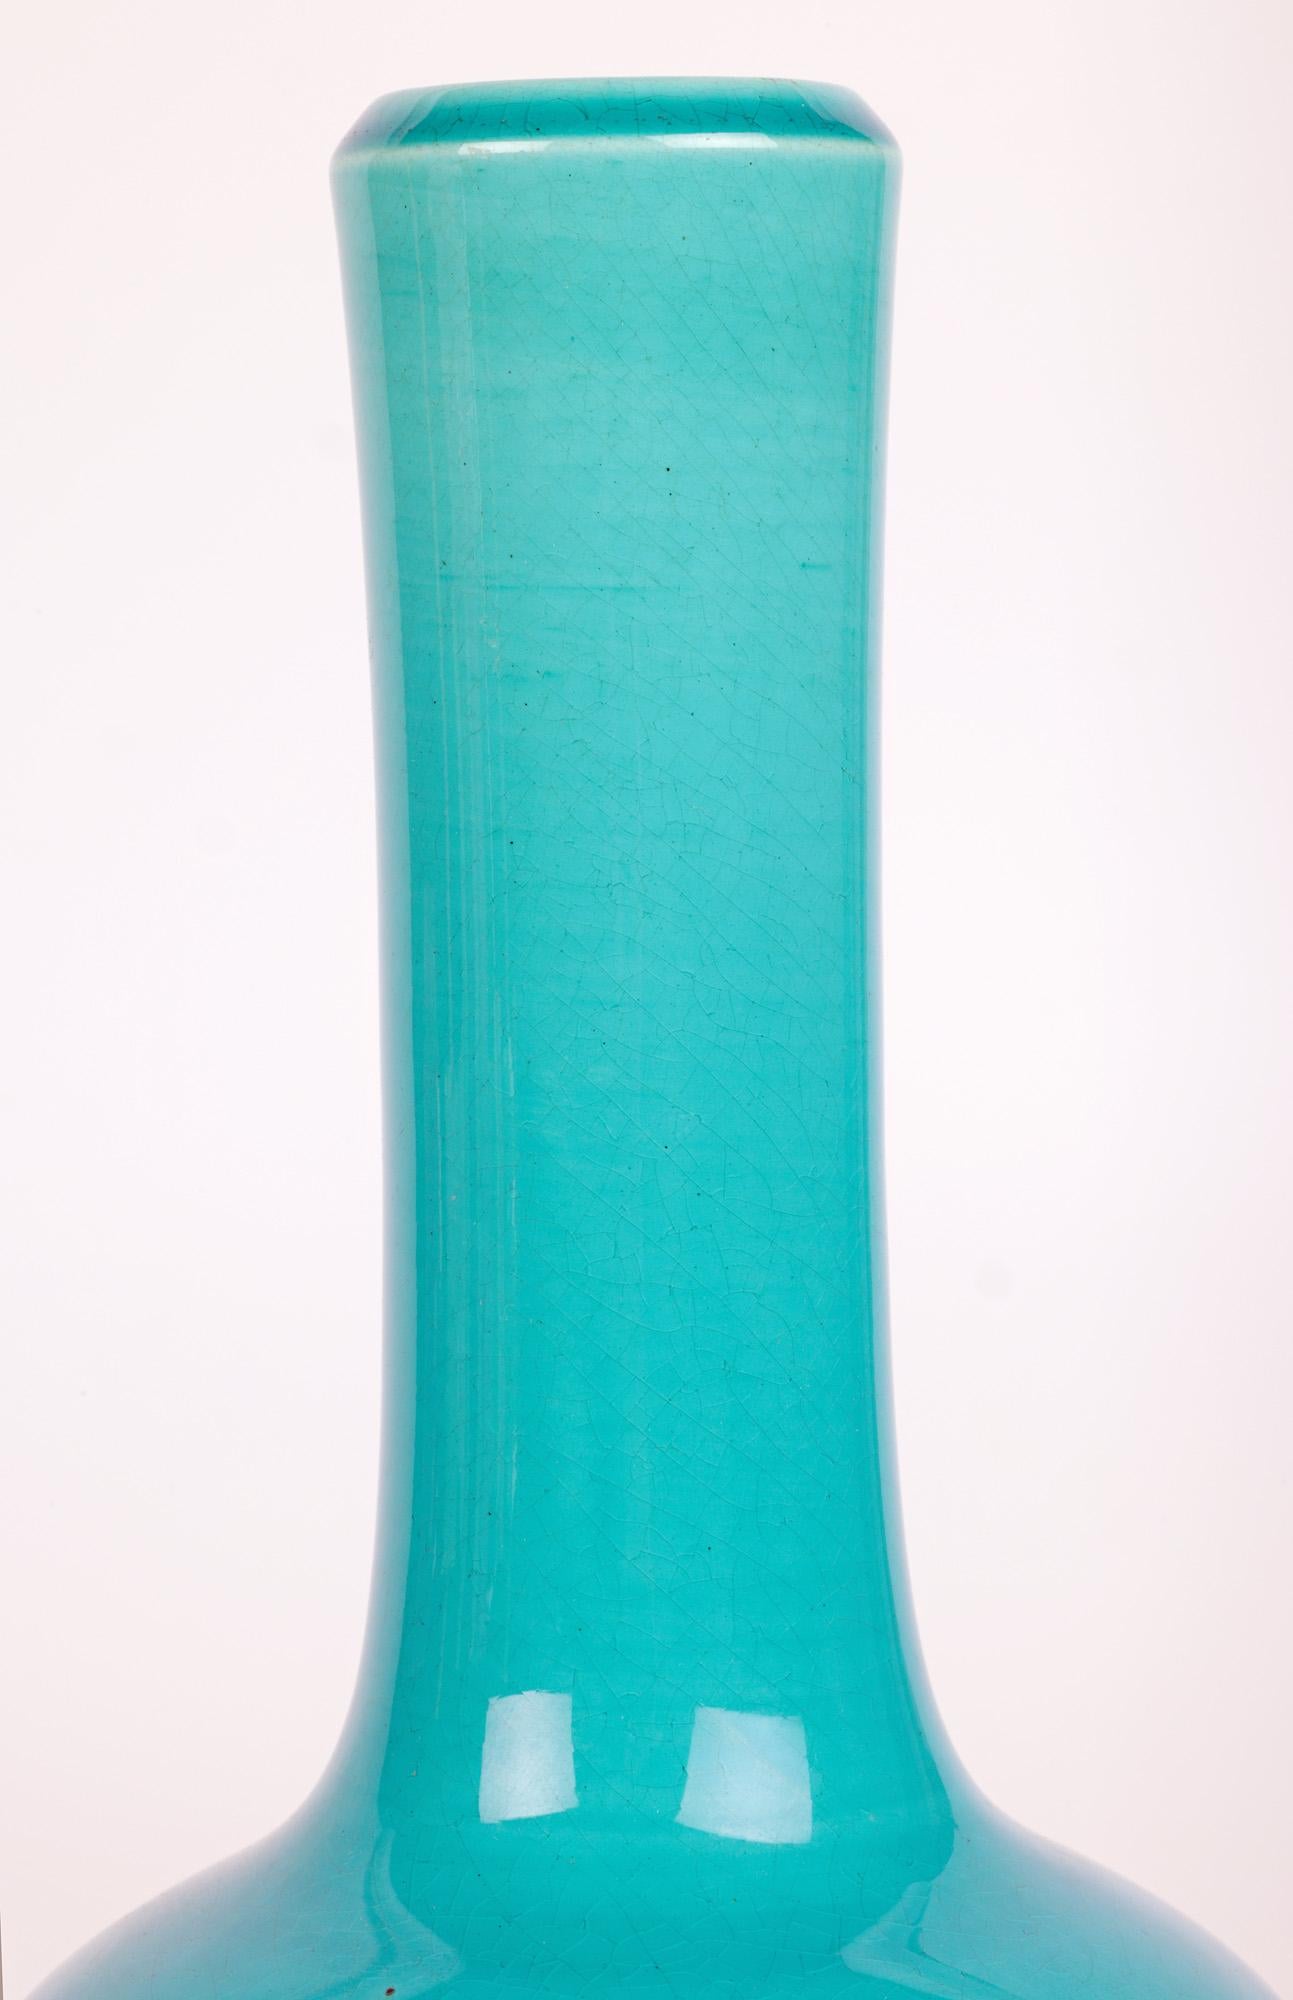 A stylish Burmantofts Arts & Crafts turquoise glazed art pottery bottle shaped vase made in Leeds and dating from around 1890. 

The vase is part of a private collection of Arts and Crafts influenced pottery amassed in the mid 1980’s. The collection